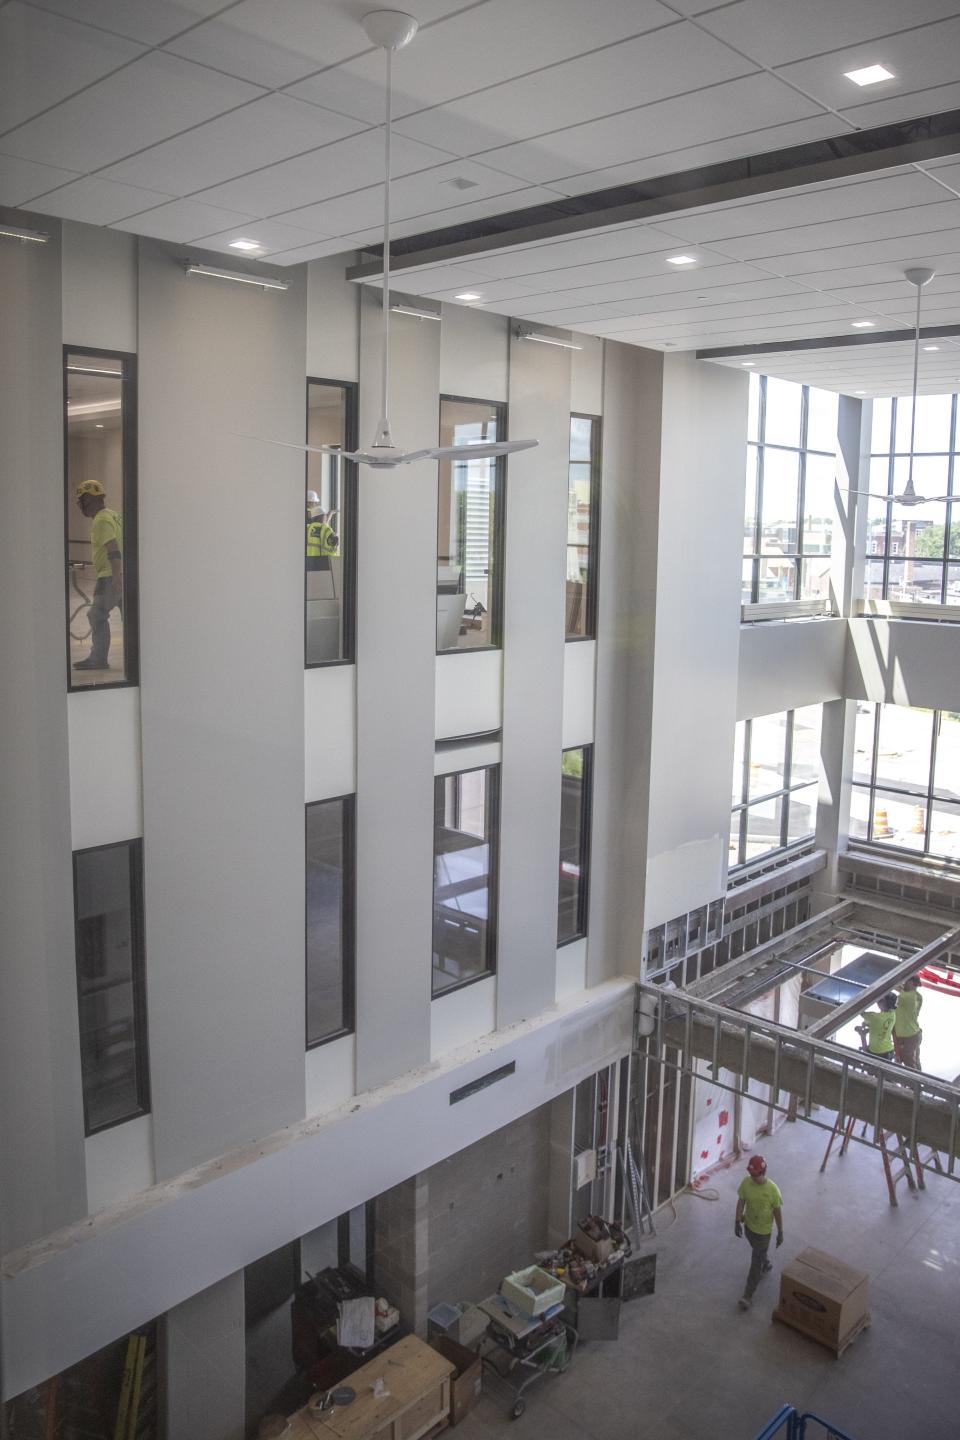 A three-story atrium will greet guests when they walk into the new portion of the Wood County Courthouse when it opens to the public early in the new year.